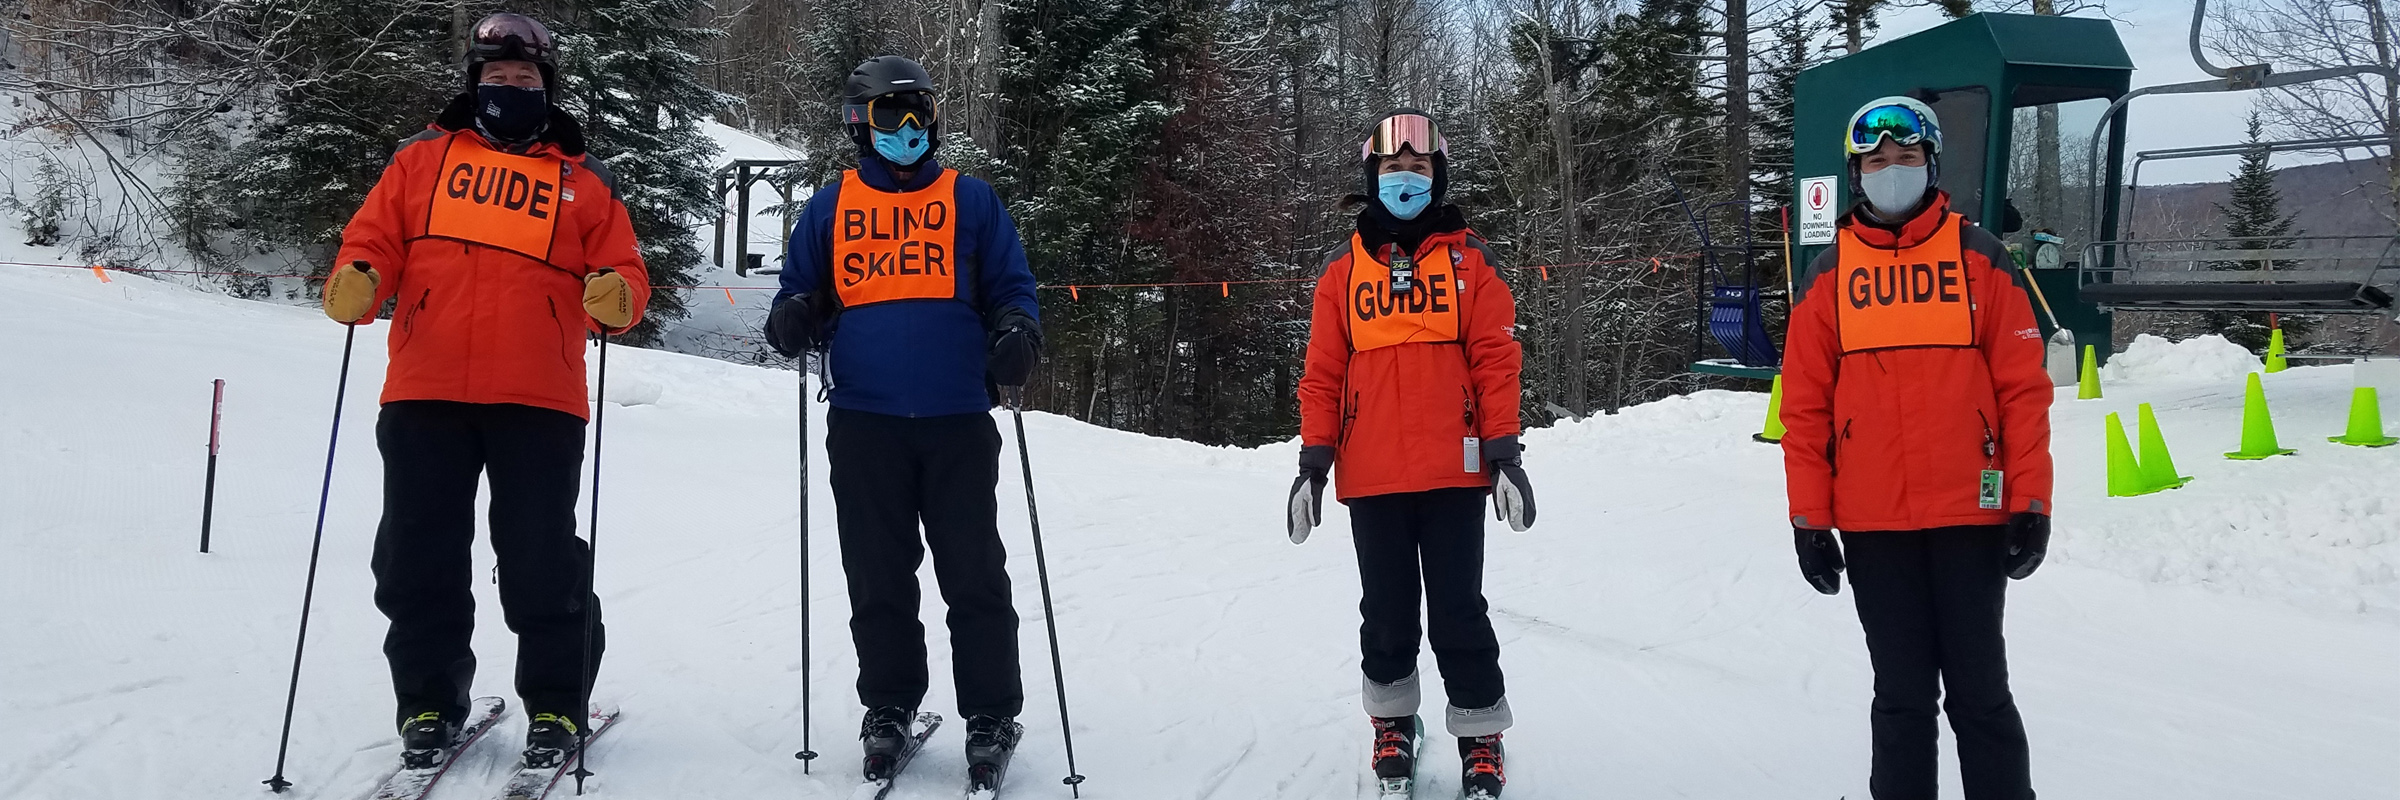 Four individuals wearing orange vests; three vests say “Guide” and one says “visually impaired.” One guide and the visually impaired individual are wearing headsets with microphones to communicate while skiing.